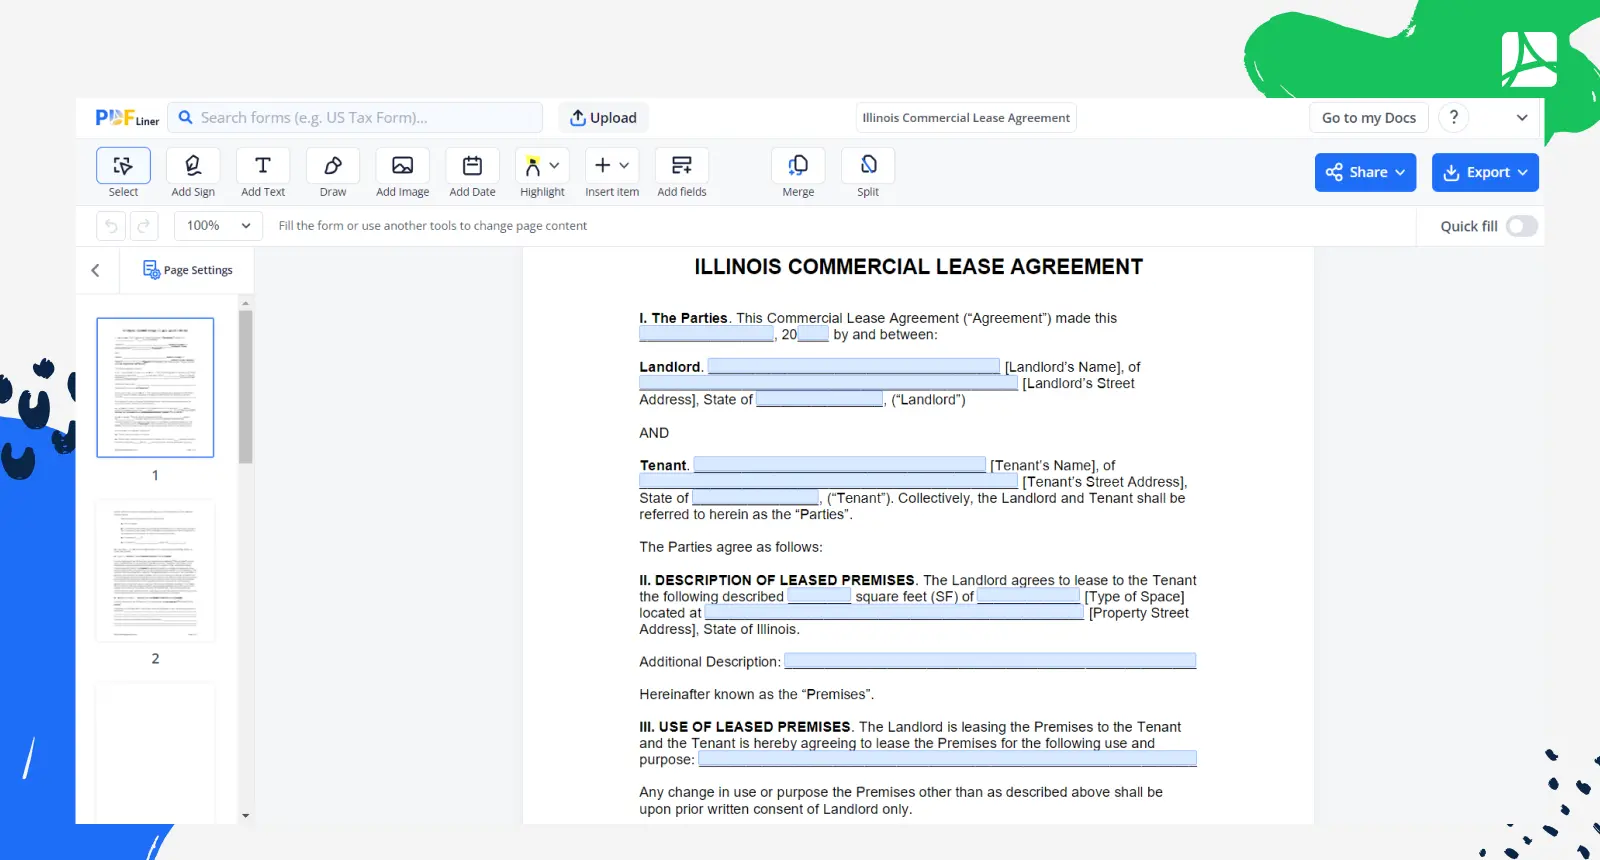 Illinois Commercial Lease Agreement Screenshot